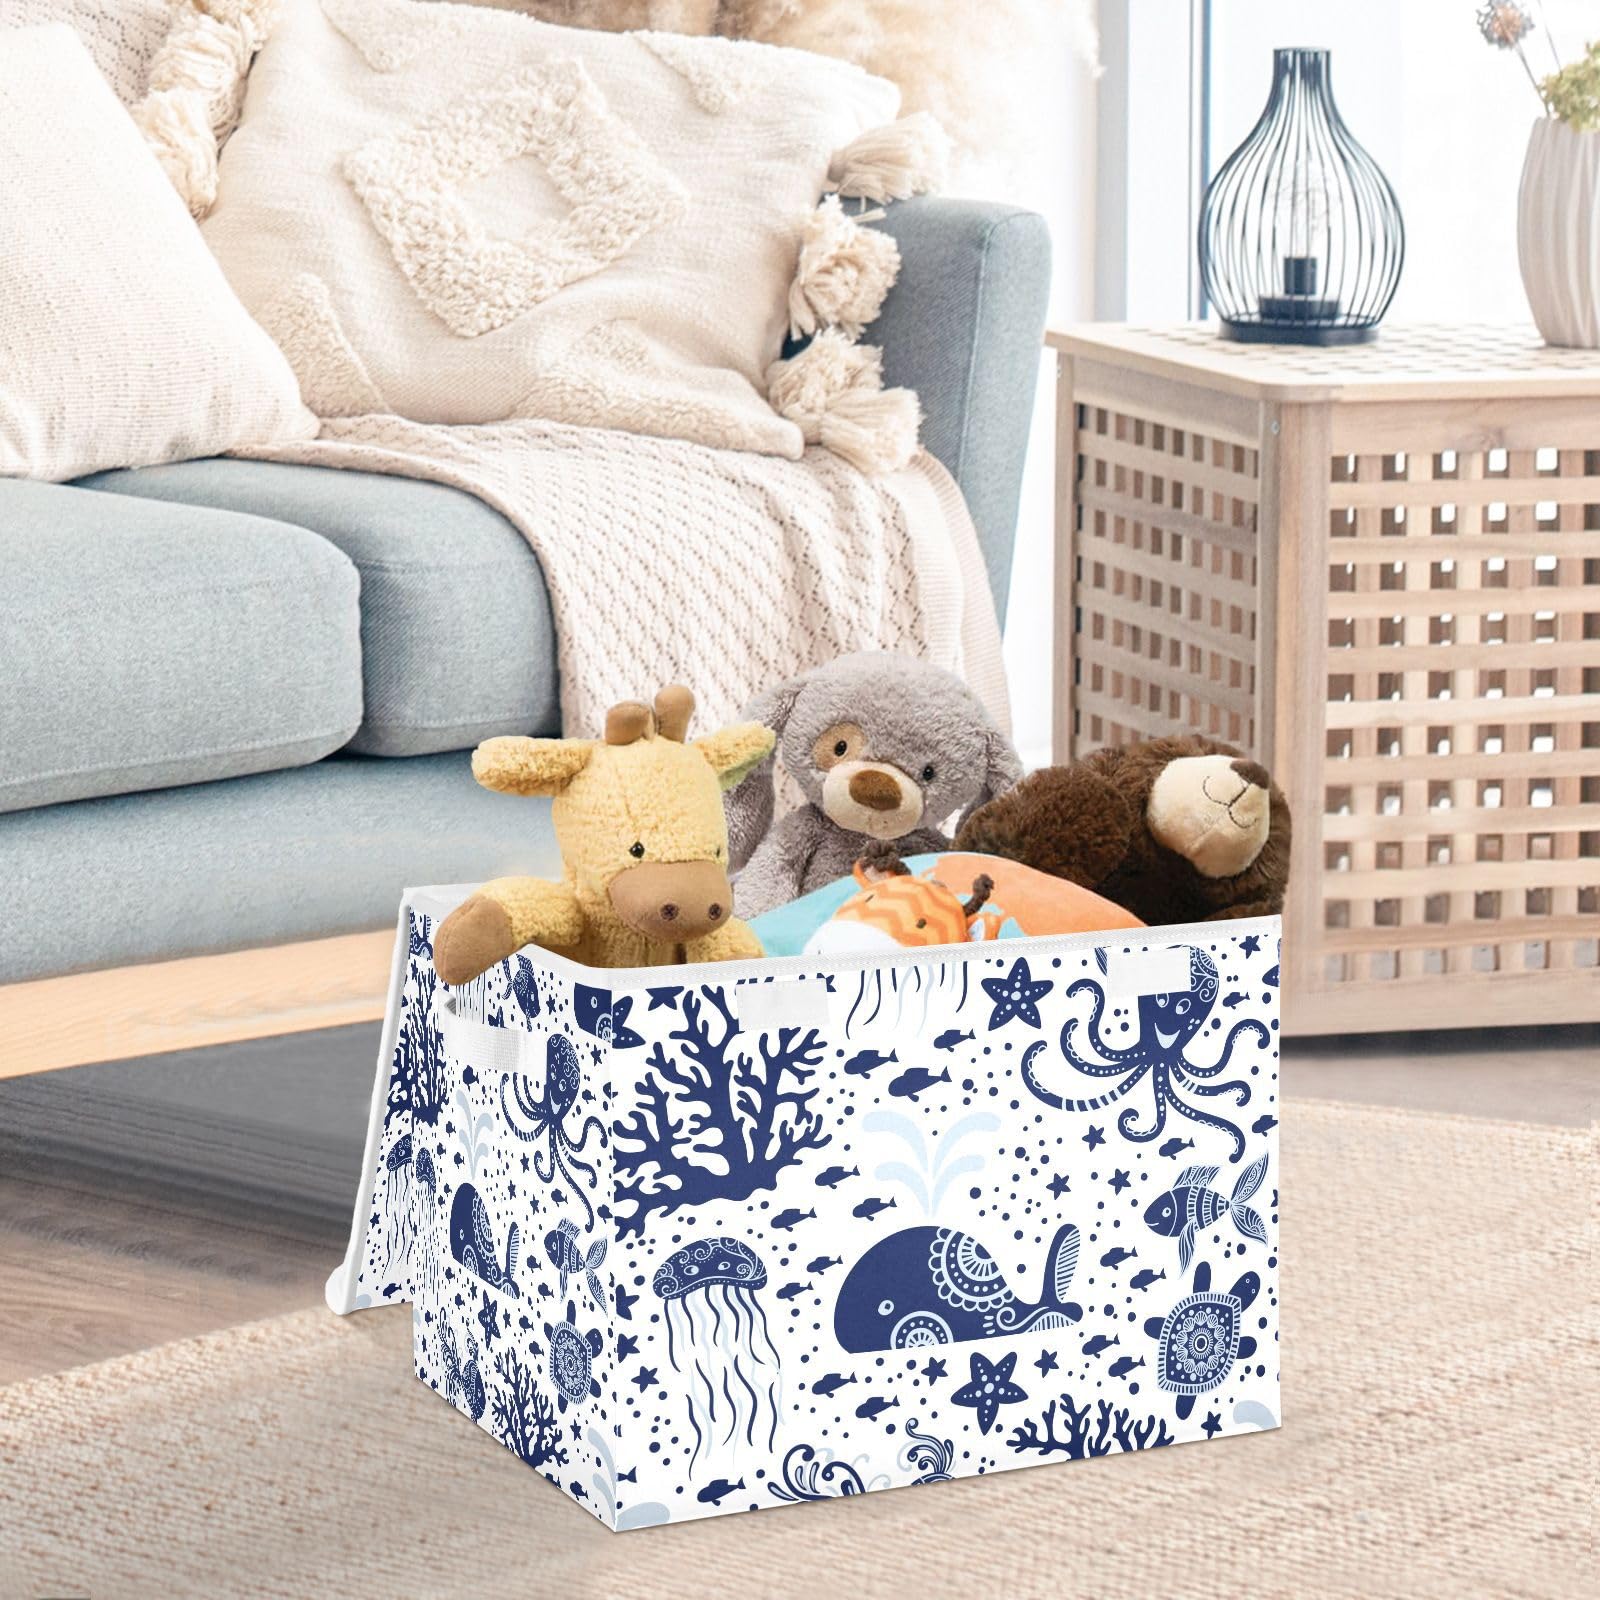 ALAZA Storage Bins Organizer Box Baskets Lidded Clothes for Shelves Closet Underwater Jellyfish Starfish Turtles Collapsible Stackable Storage Cubes Handles